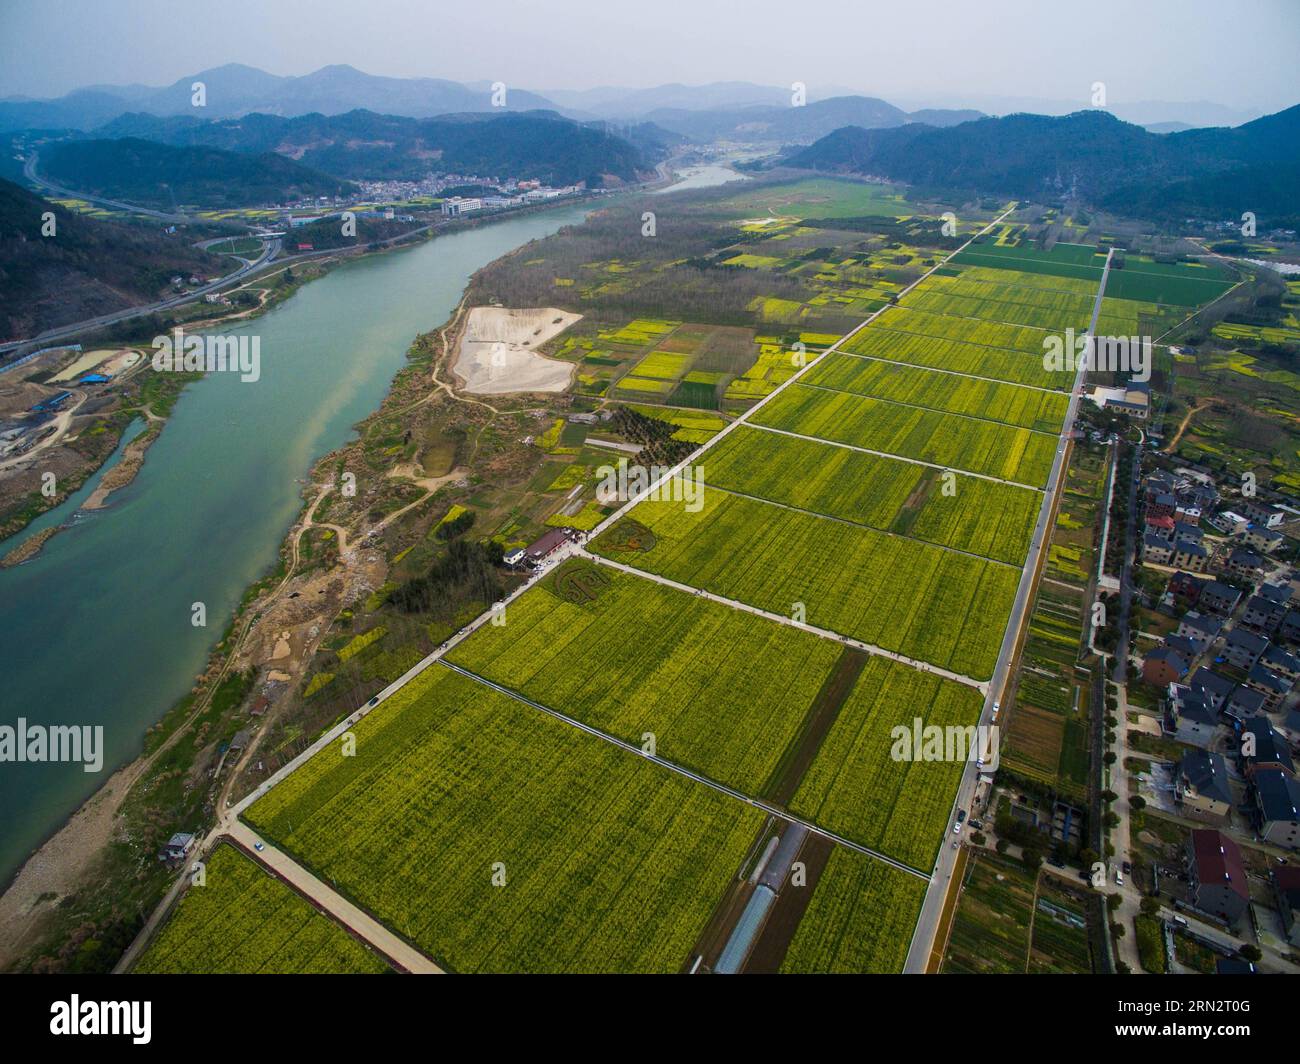 (150323) -- HANGZHOU, March 23, 2015 -- Photo taken on March 23, 2015 shows the cole flower farmlands in Tonglu County of Hangzhou City, capital of east China s Zhejiang Province. Various flowers blossom during Spring in Tonglu, attracting tourists to visit the County and promoting the local tourism. ) (zwx) CHINA-HANGZHOU-TONGLU-TOURISM(CN) XuxYu PUBLICATIONxNOTxINxCHN   Hangzhou March 23 2015 Photo Taken ON March 23 2015 Shows The Cole Flower Farm country in Tonglu County of Hangzhou City Capital of East China S Zhejiang Province Various Flowers Blossom during Spring in Tonglu Attracting tou Stock Photo